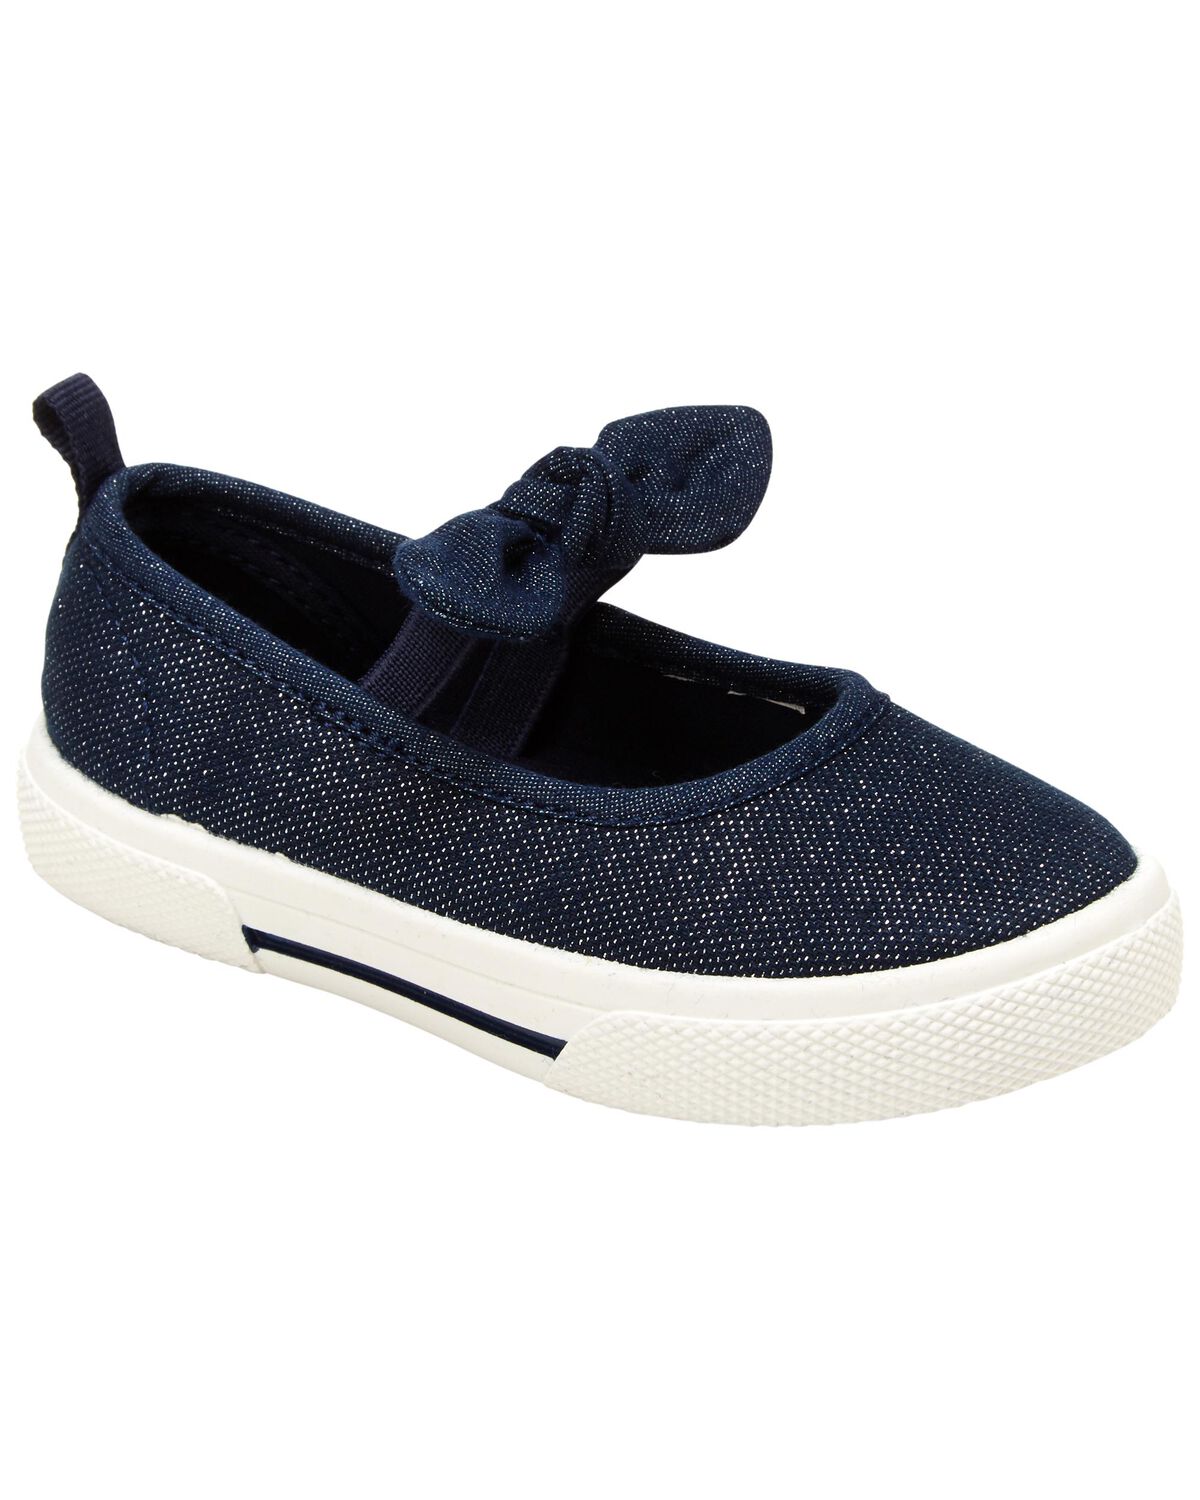 Navy Toddler Mary Jane Shoes | carters.com